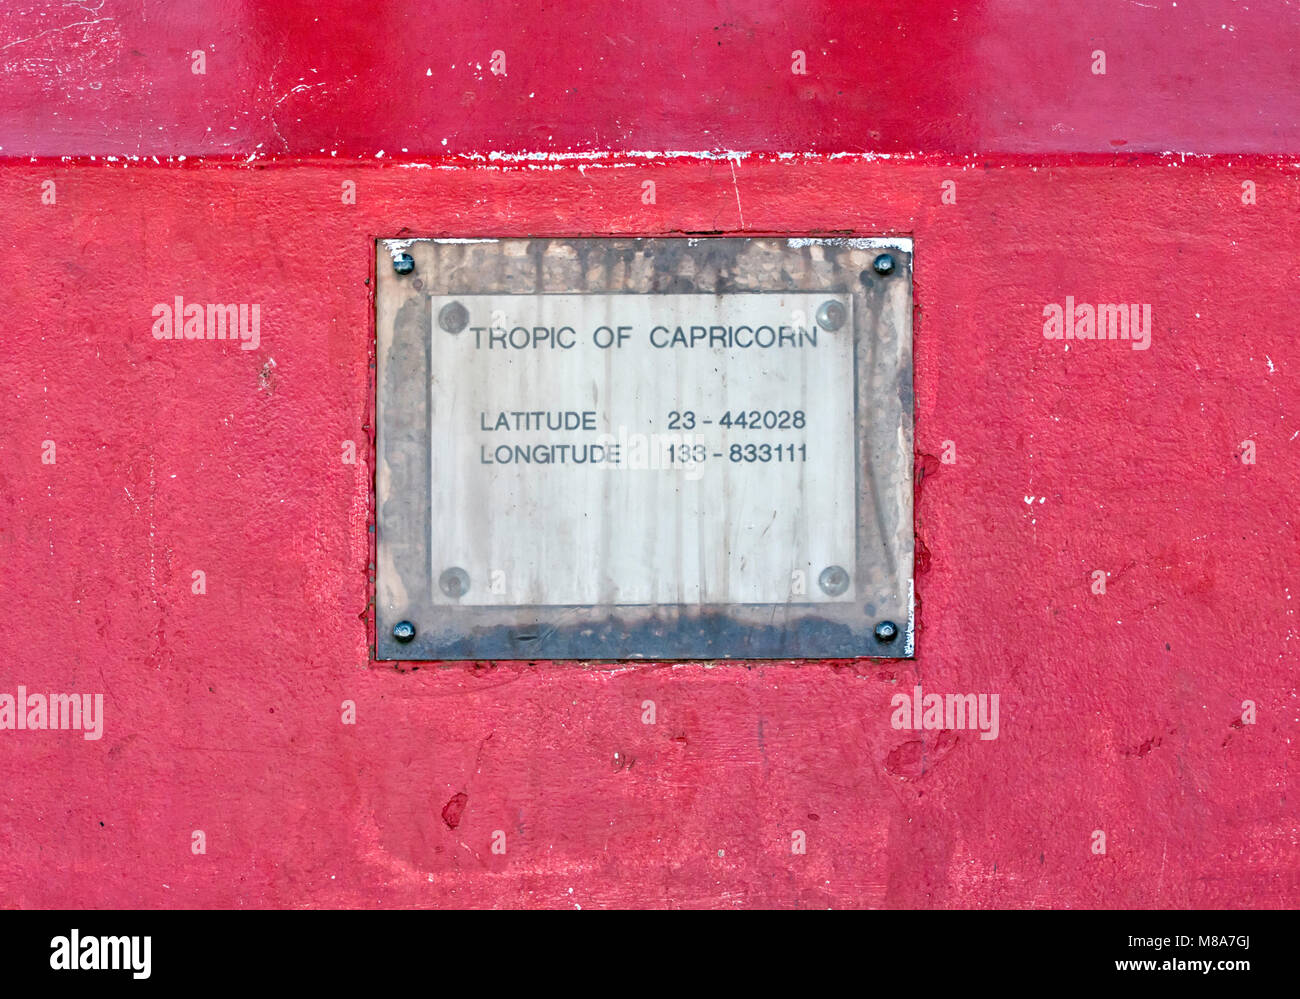 Iconic old rugged metal plate of the Tropic of Capricorn on a red iron background, Australia Stock Photo